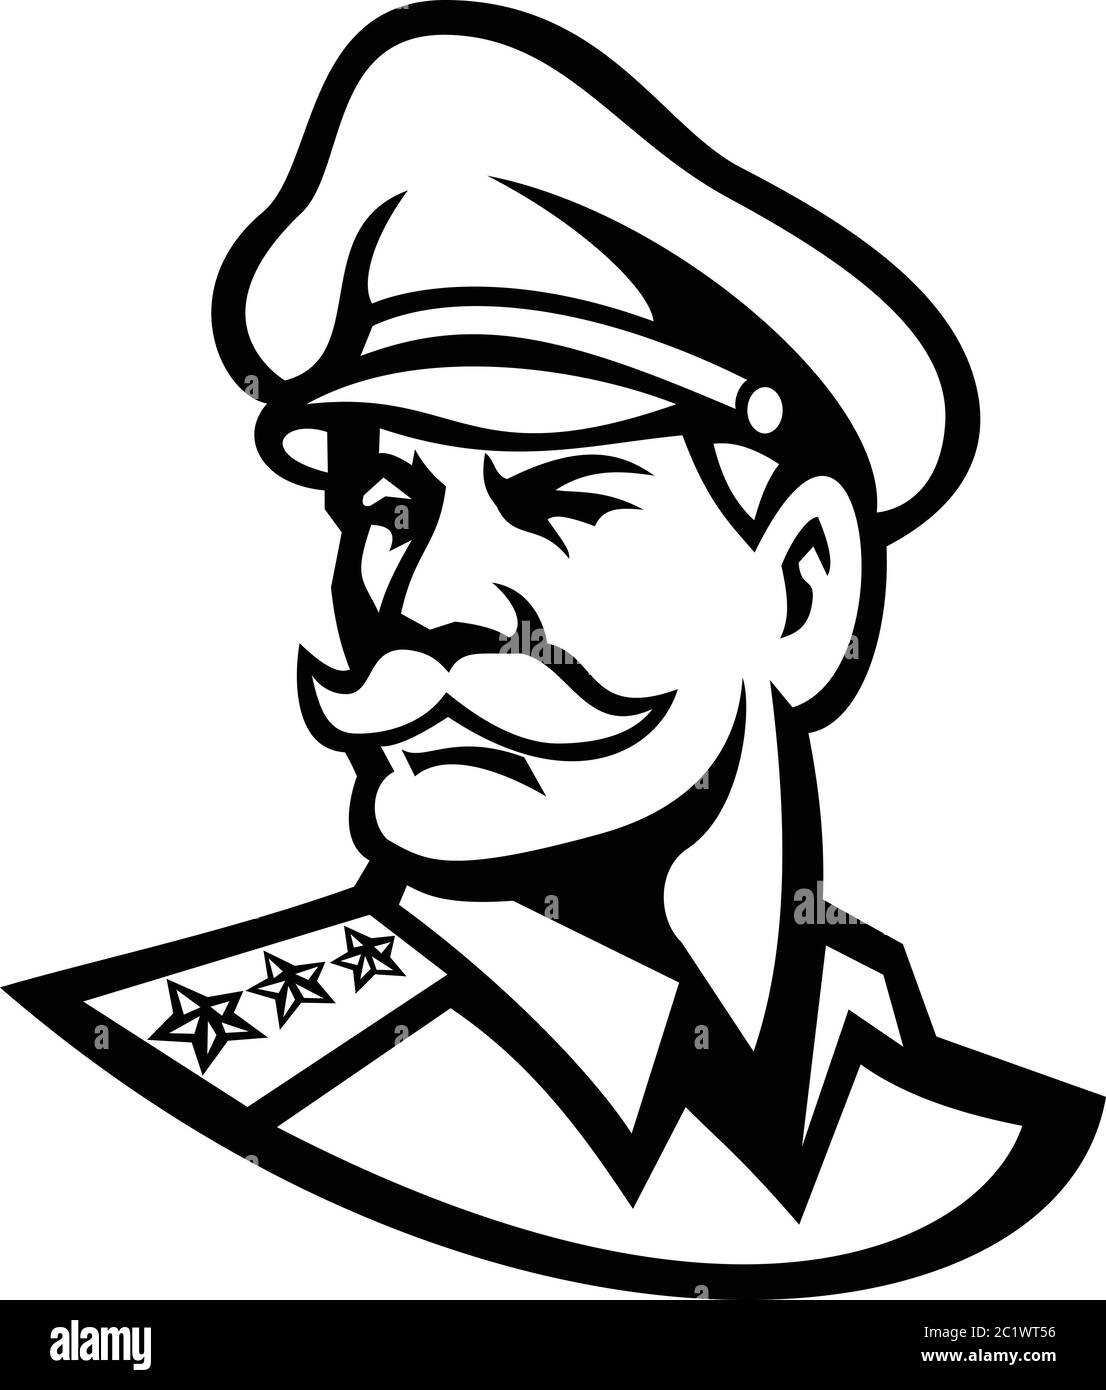 Black and white mascot illustration of head of an American three-star general wearing a peaked cap looking forward viewed from side on isolated backgr Stock Vector